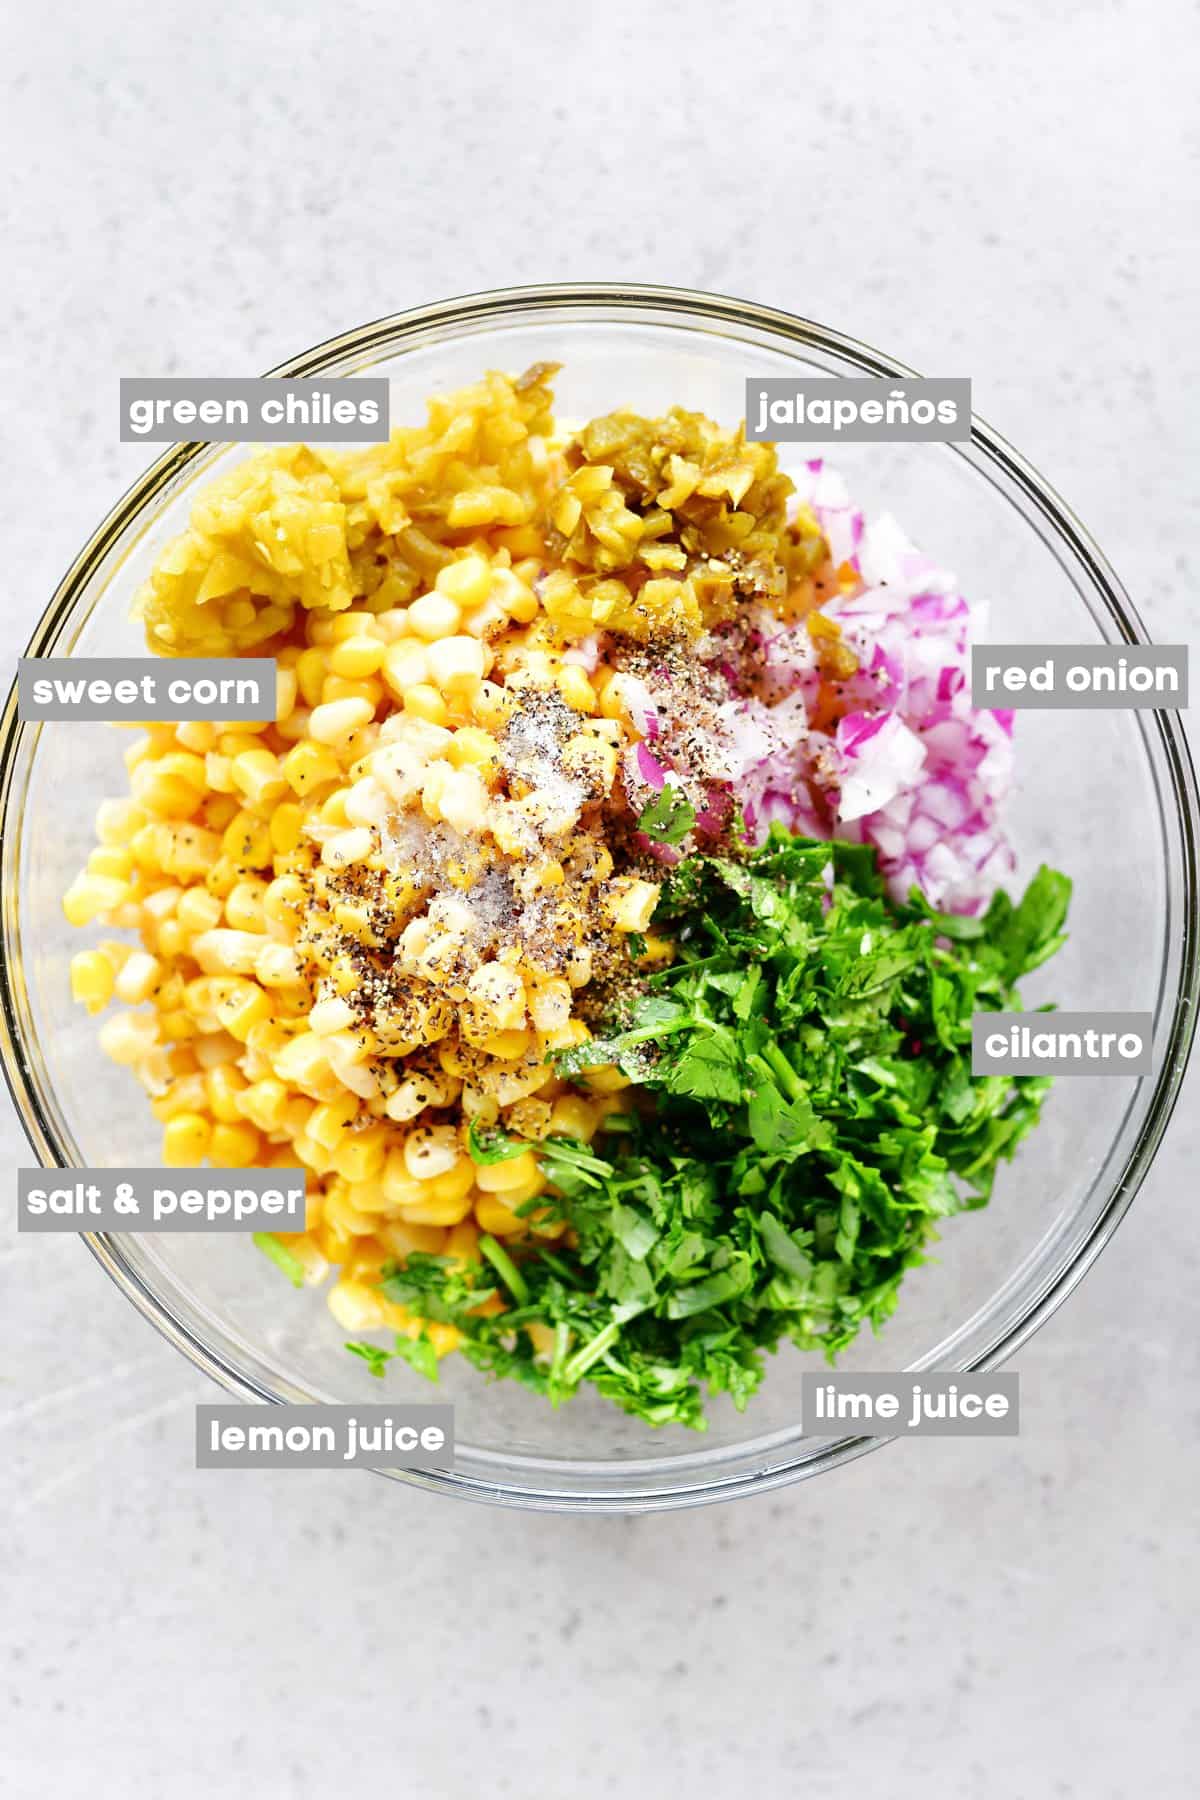 Labeled ingredients in a glass bowl.